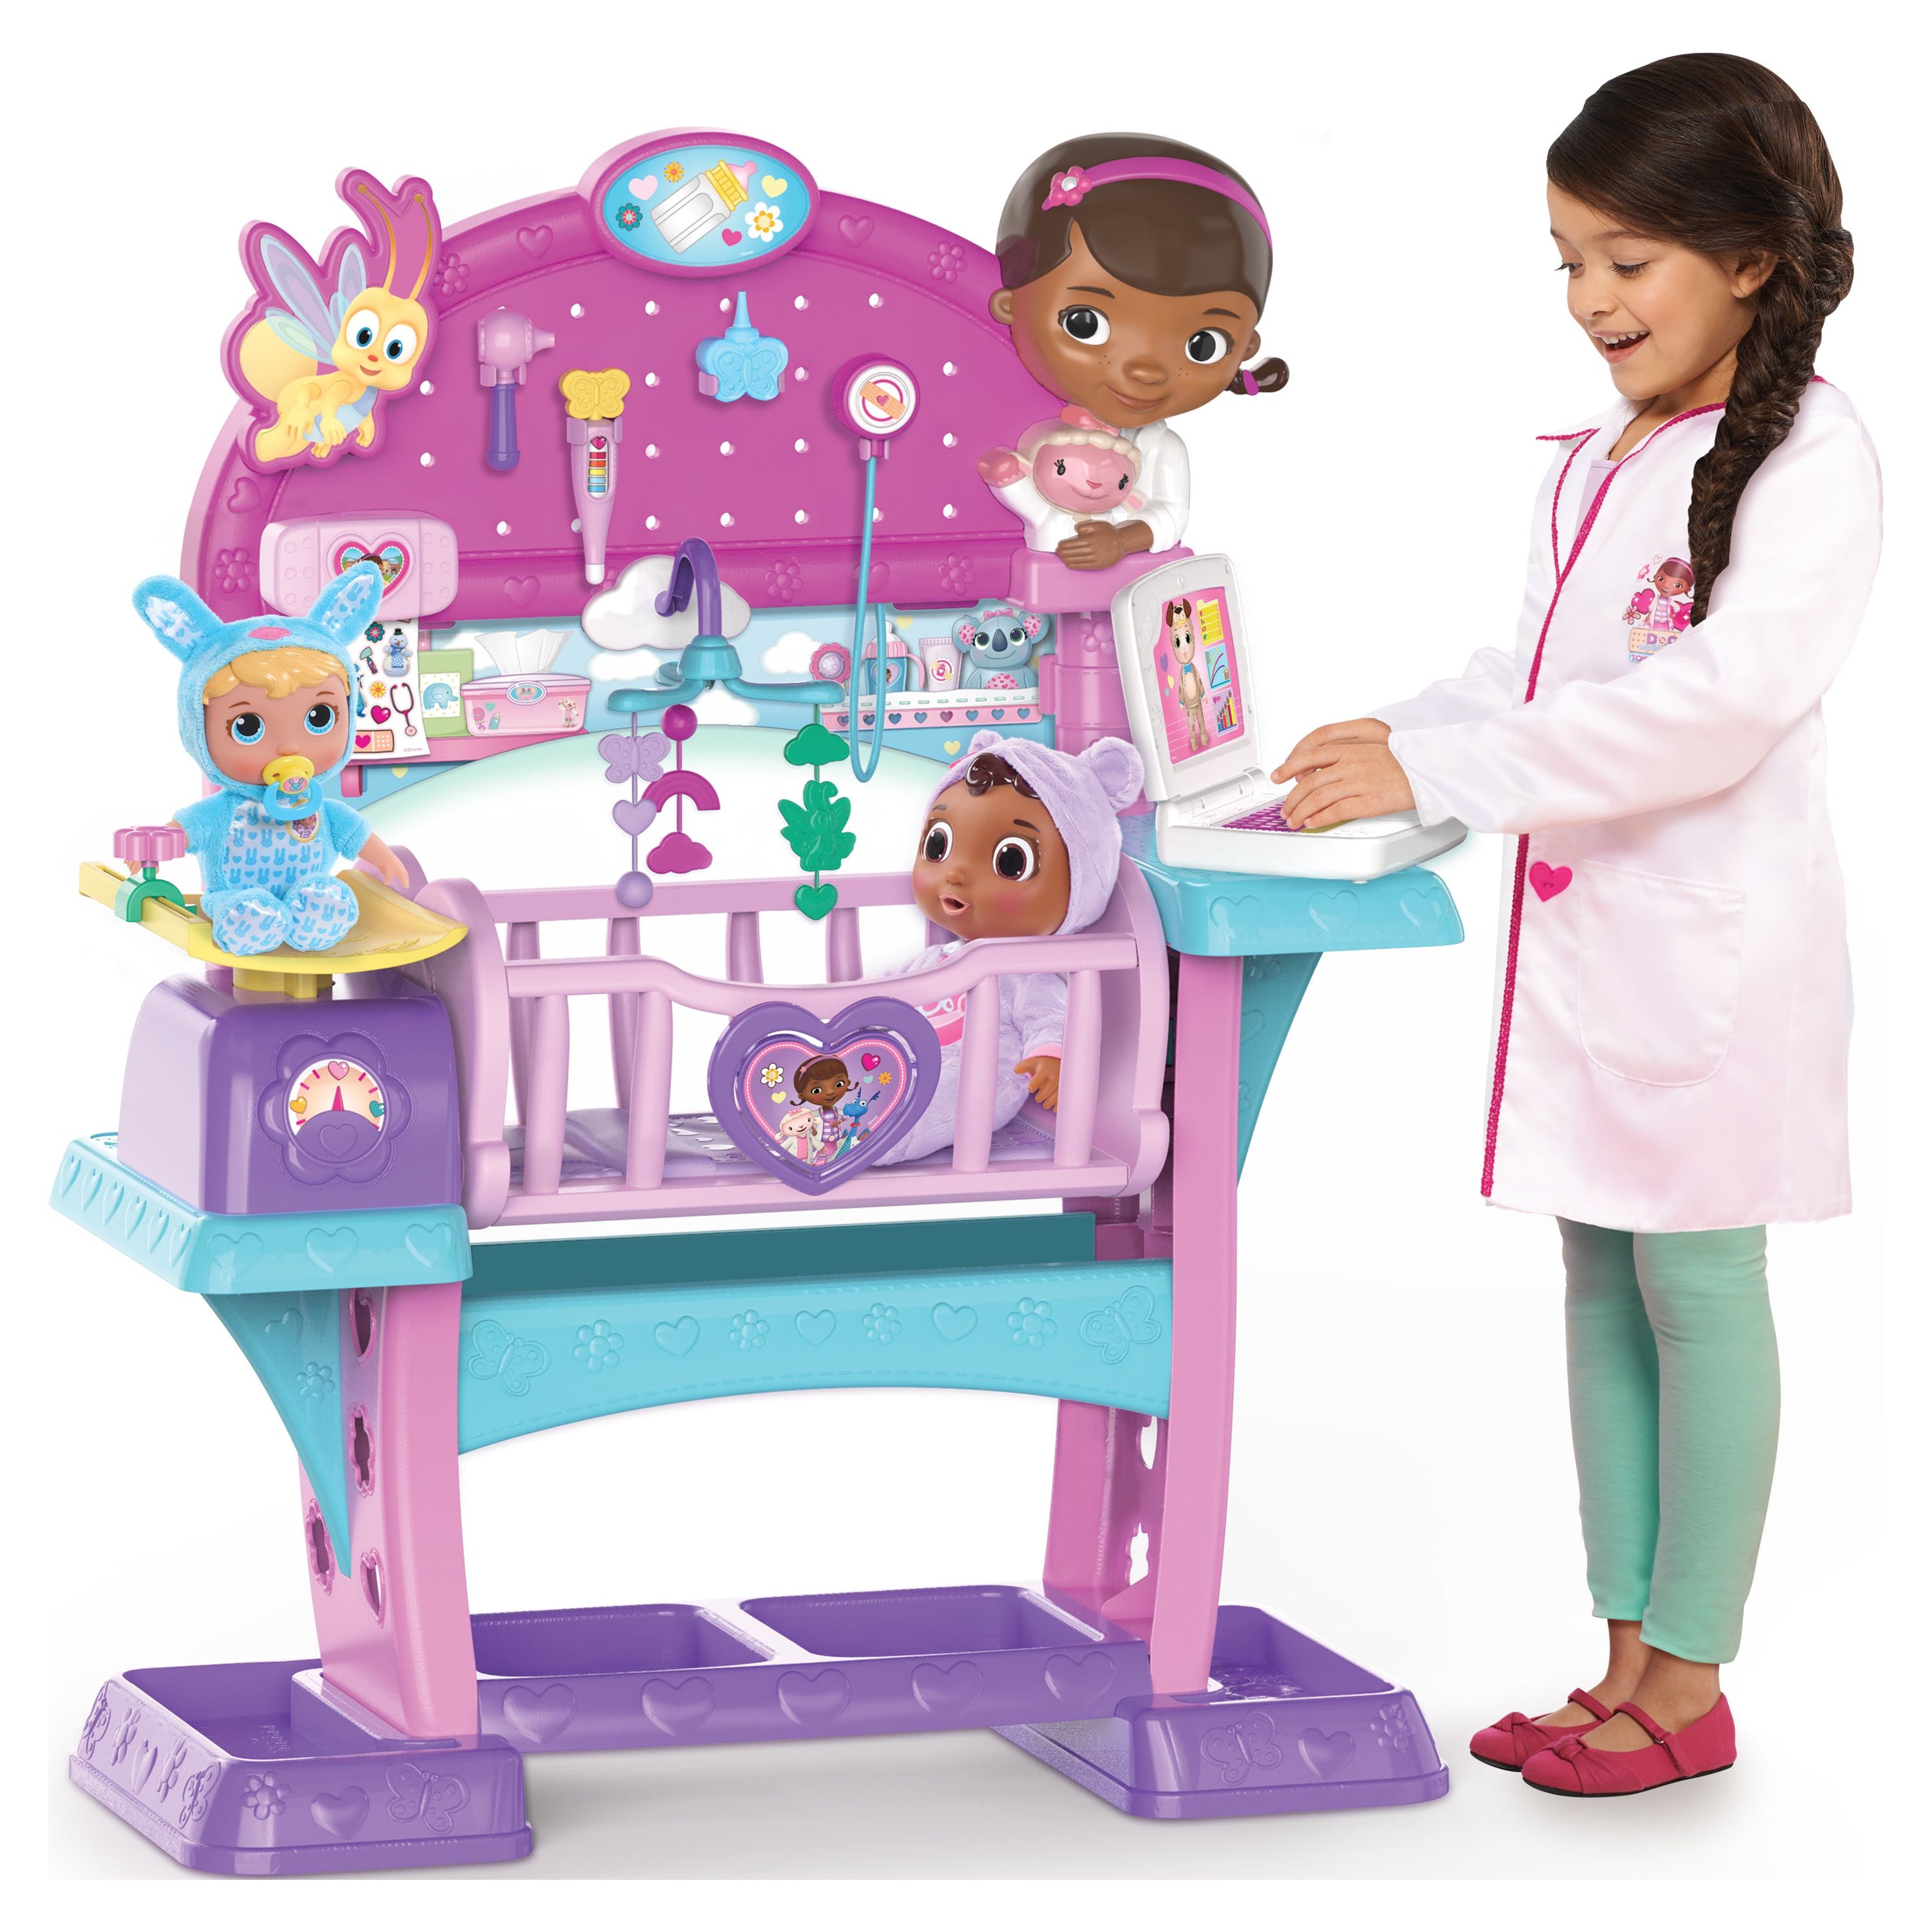 Doc McStuffins Baby All-in-One Nursery, Officially Licensed Kids Toys for Ages 3 Up, Gifts and Presents - image 3 of 3